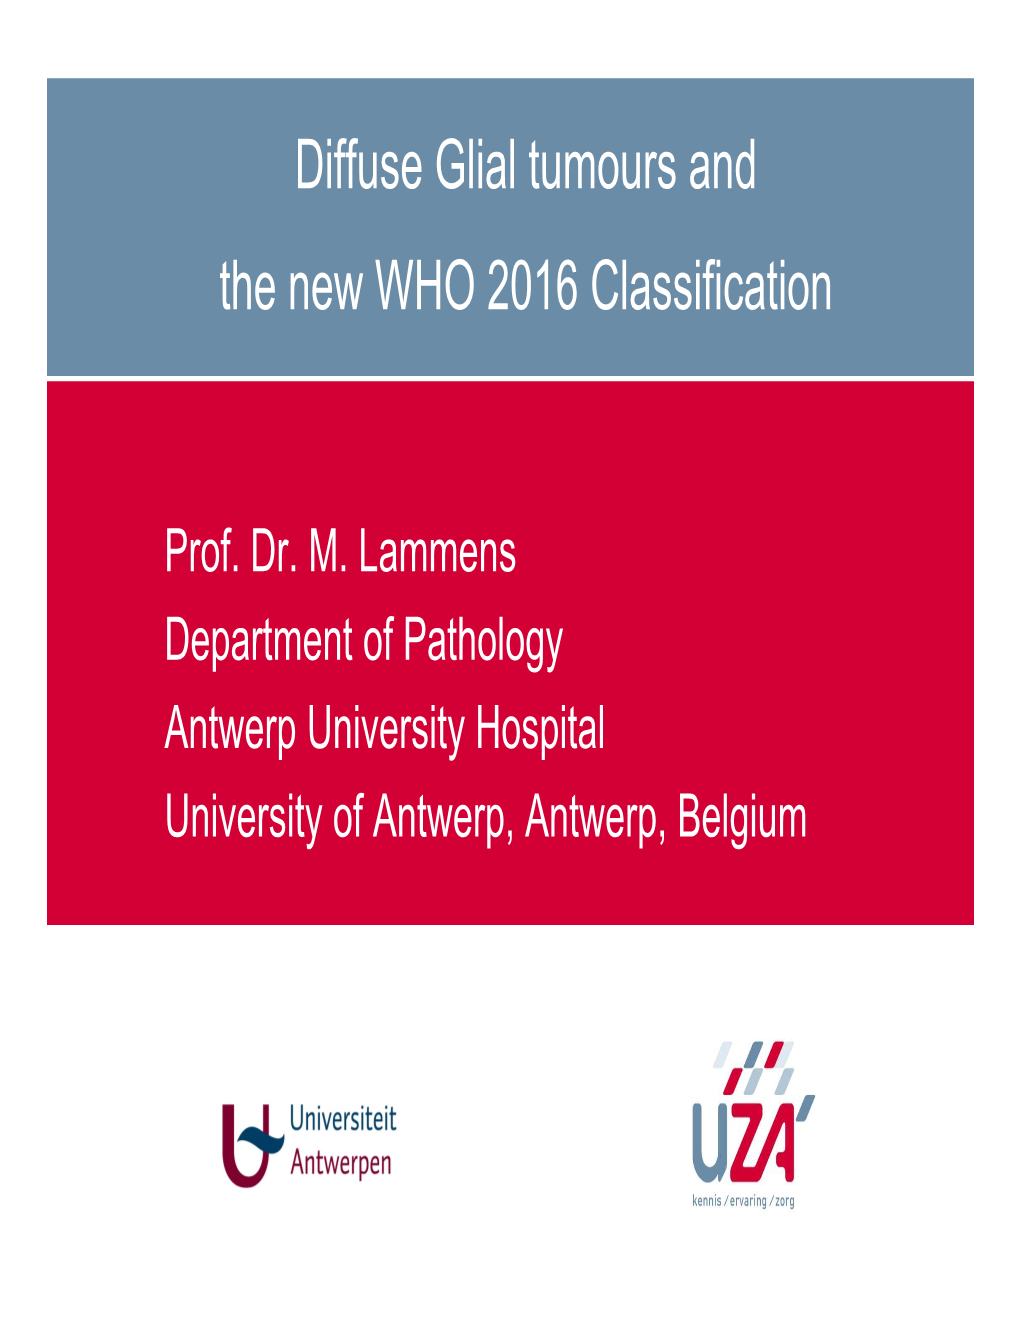 Diffuse Glial Tumours and the New WHO 2016 Classification